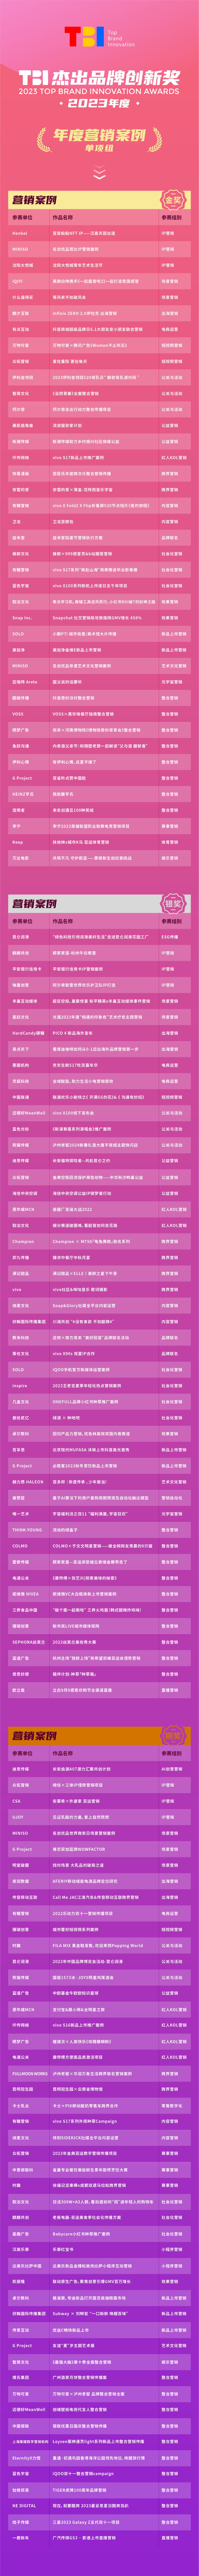 http://img.toumeiw.cn/upload/images/20240118/a7f40c7cf59a2011a2cf9ce981e0f121.png